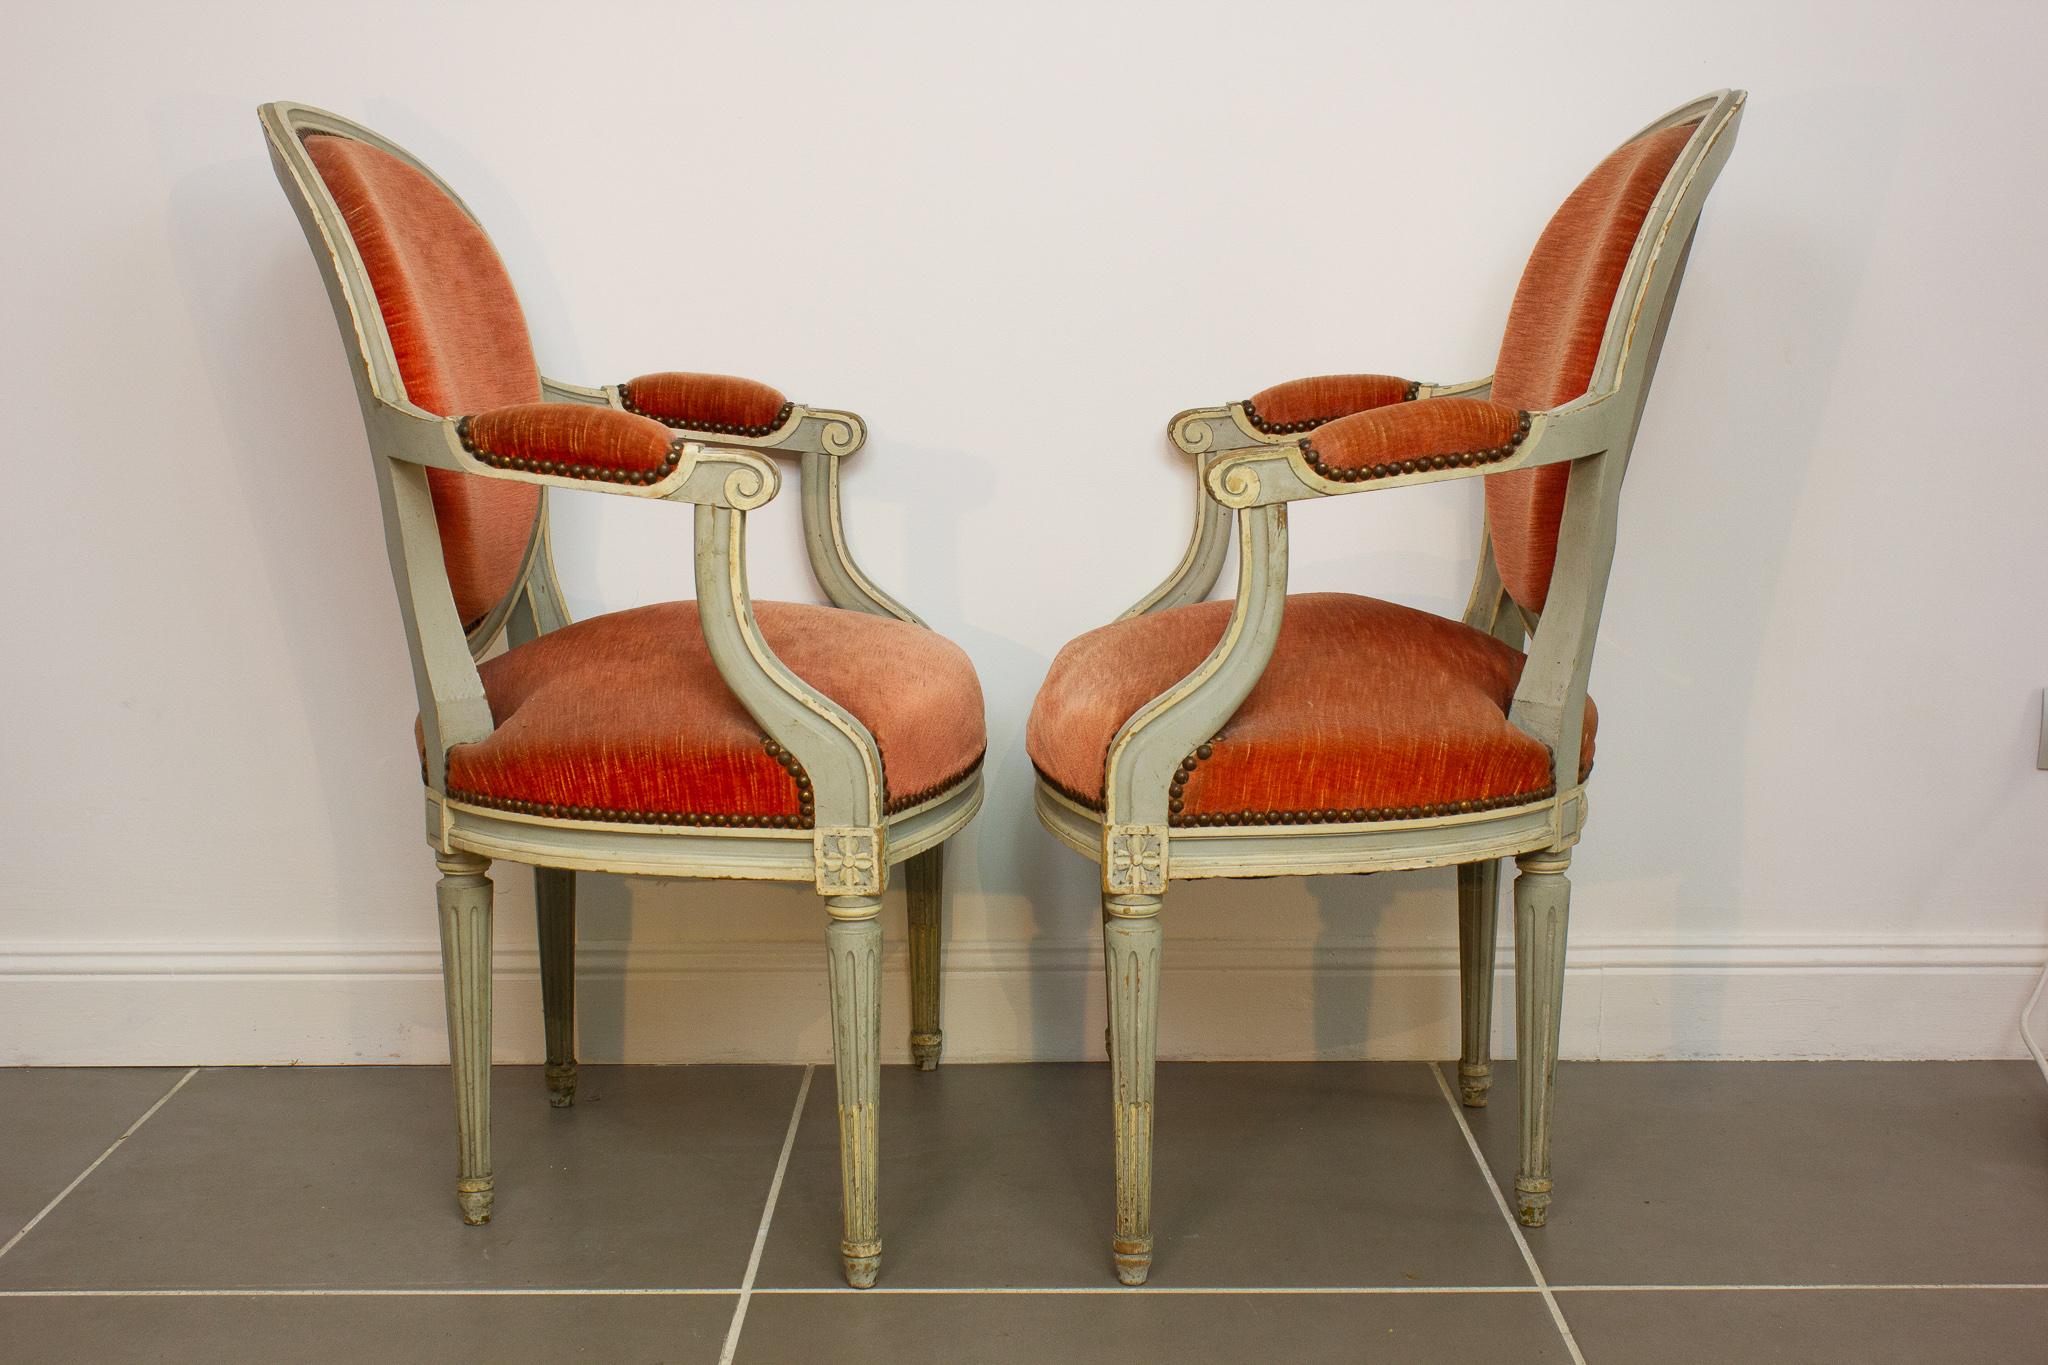 Charming pair of Louis XVI style medallion armchairs dating from the 1950s. The base is typically Louis XVI fluted and tapered. The legs are connected to the seat by dice sculpted with flowers. The armrests are sculpted with pleasure. They are